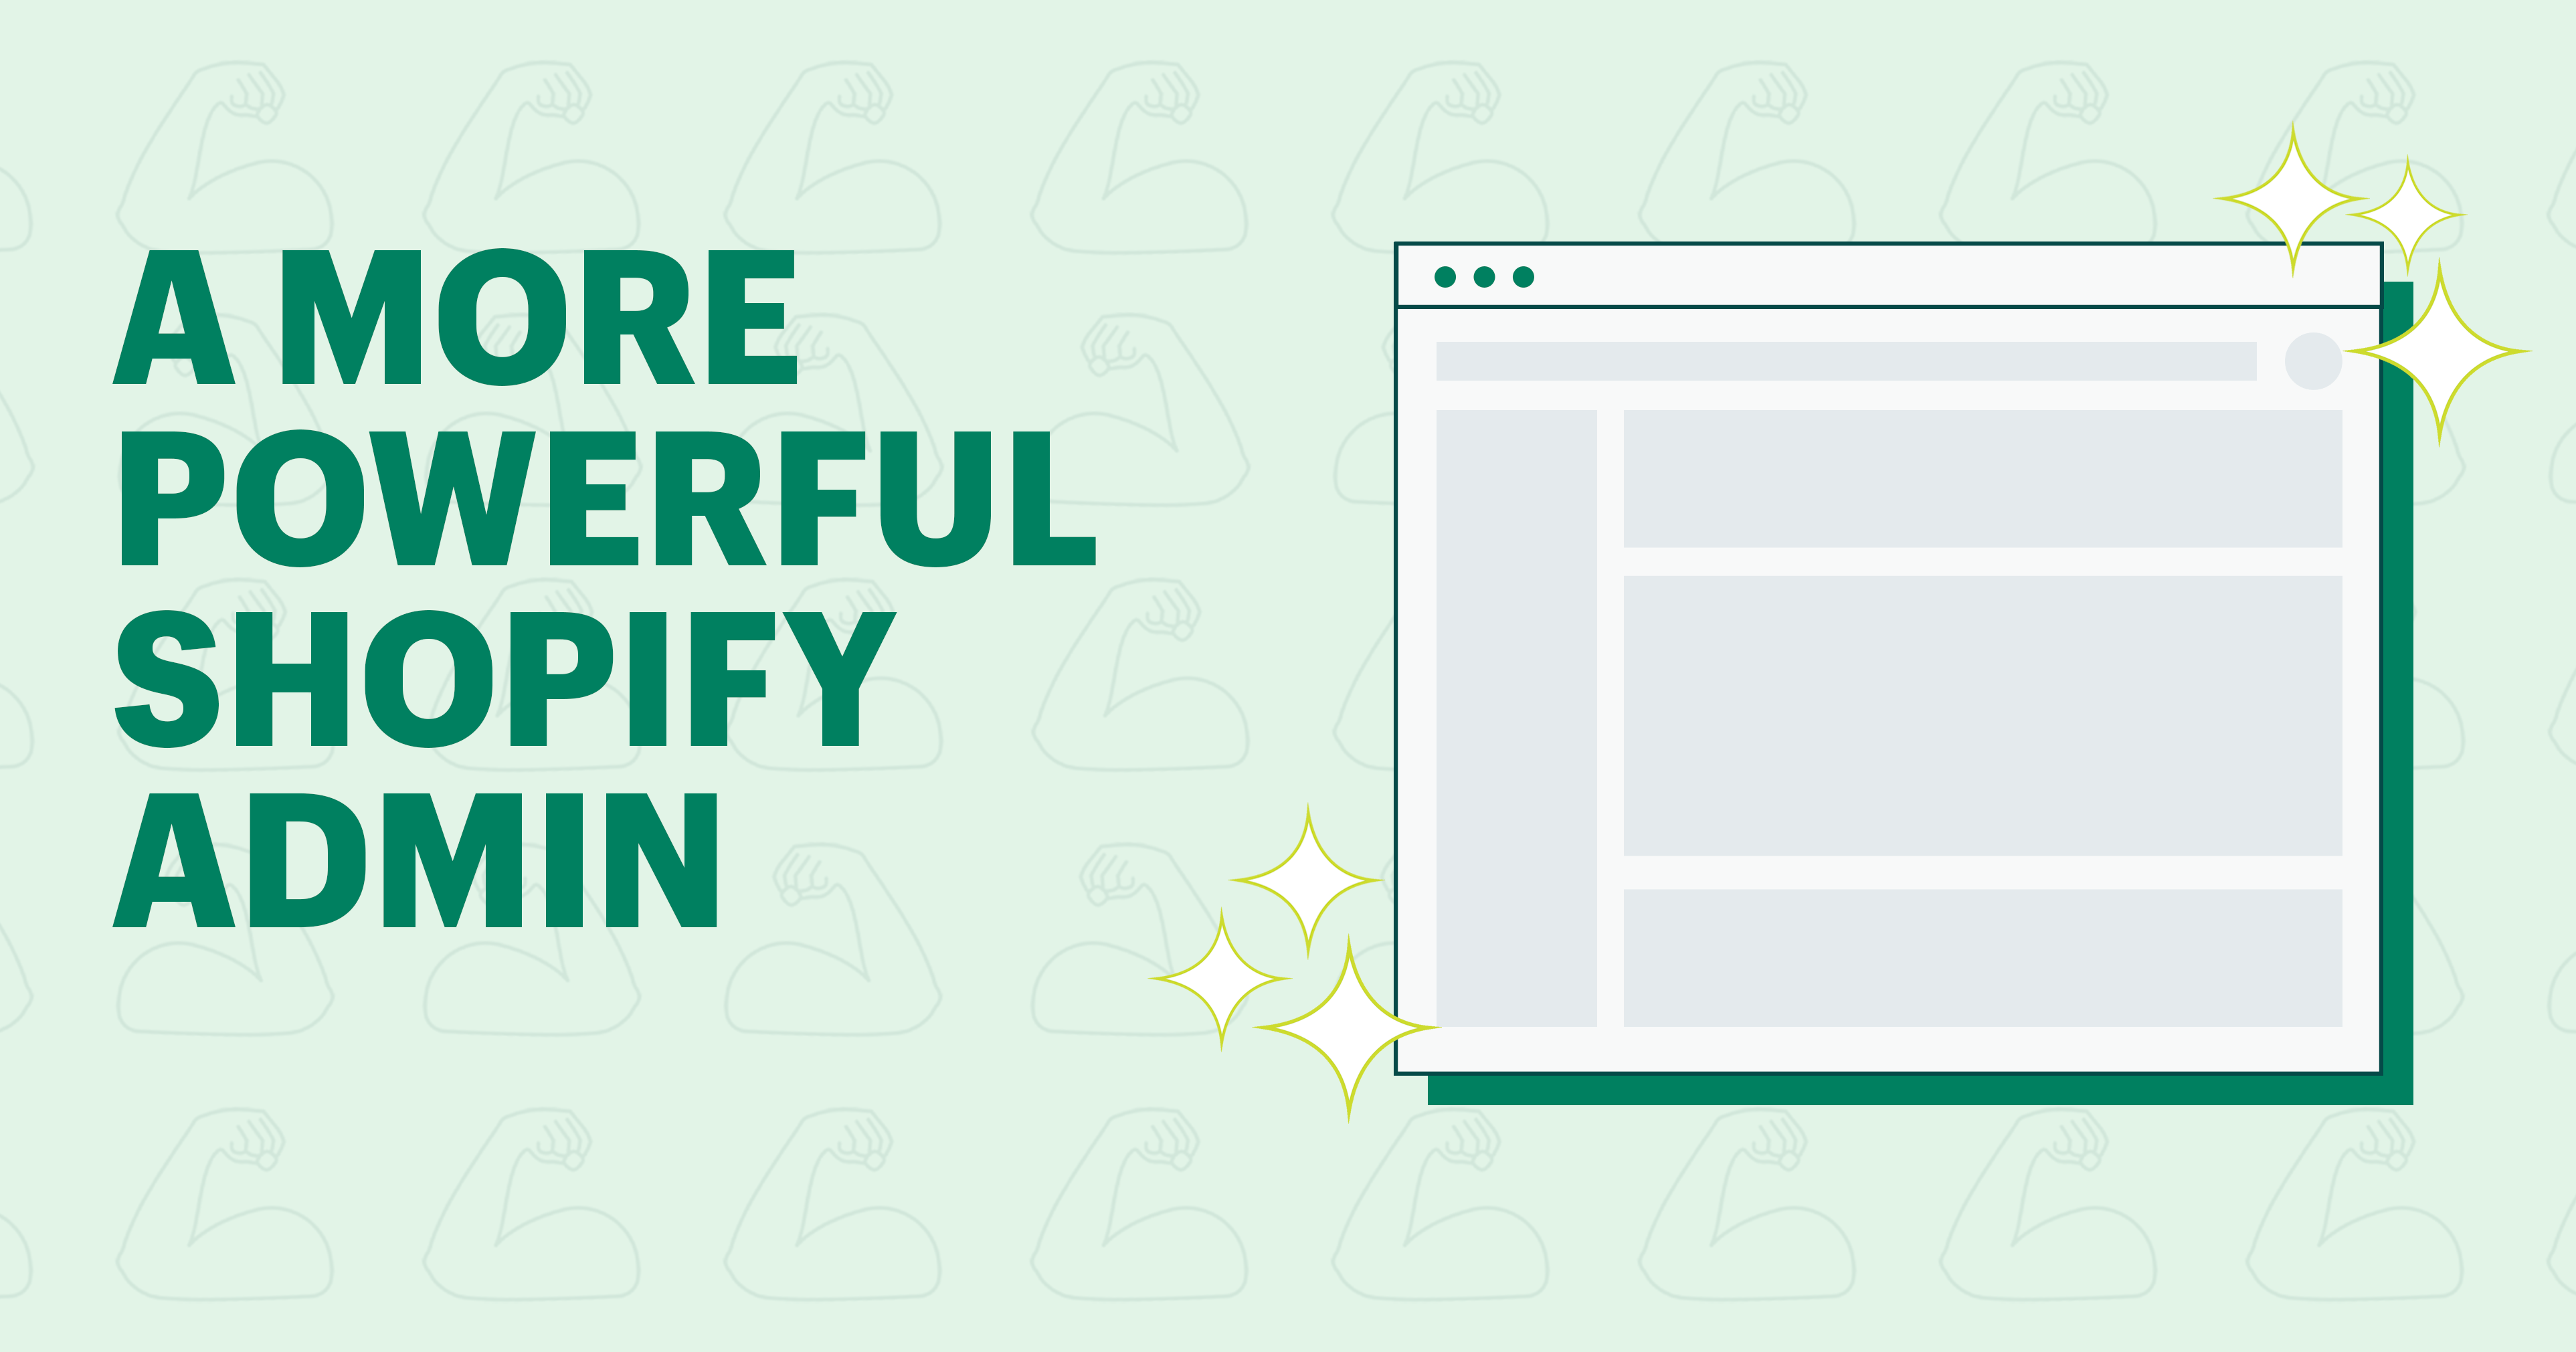 Improvements to the Shopify admin, making it more approachable and powerful than ever.